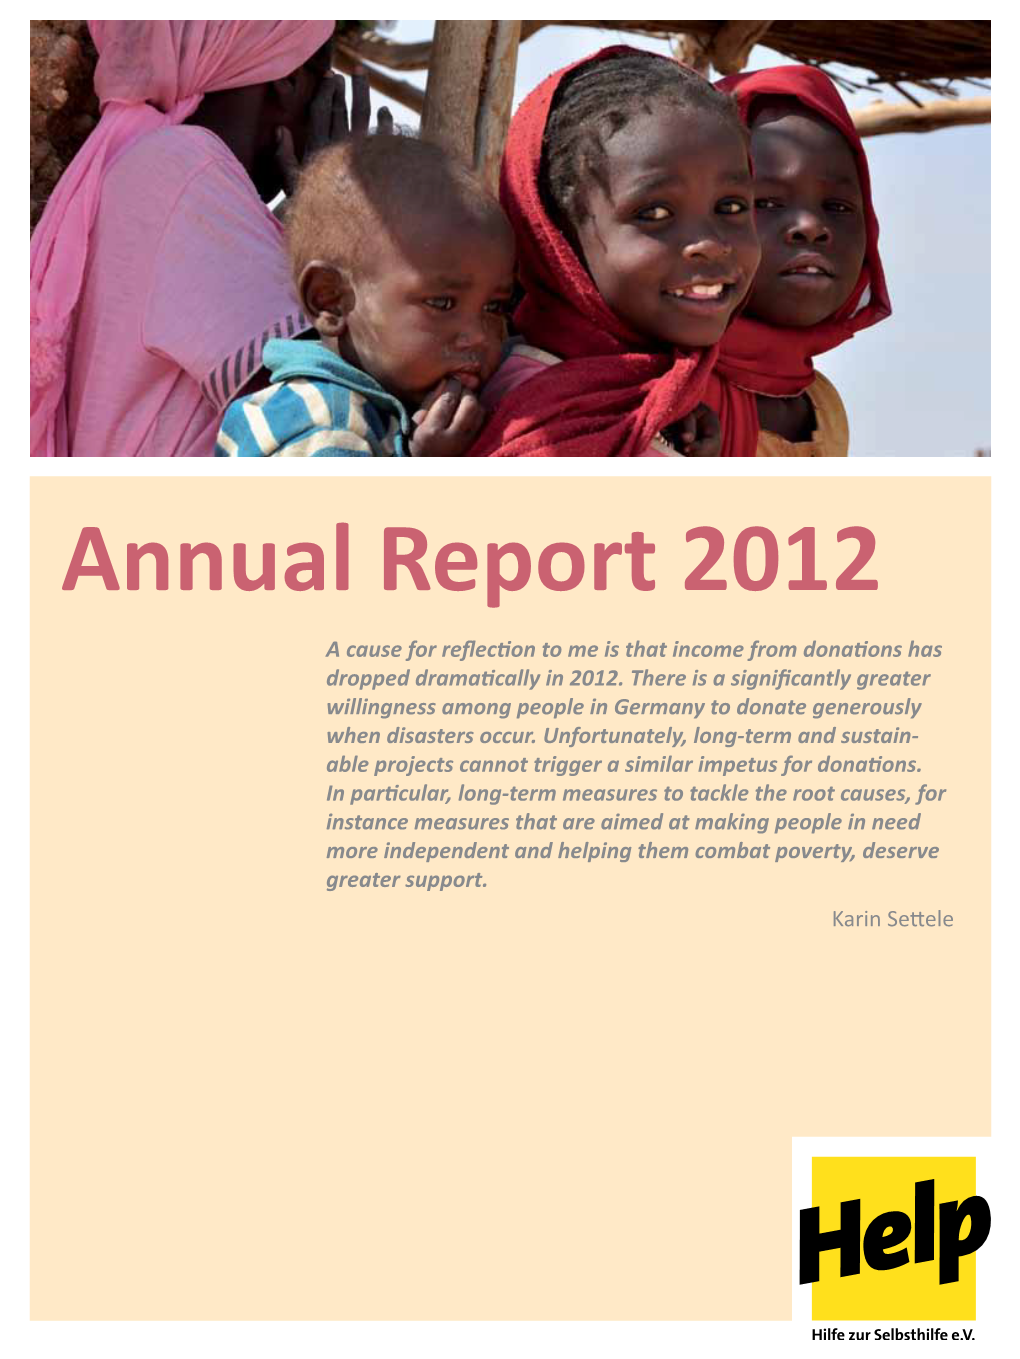 Annual Report 2012 a Cause for Reflection to Me Is That Income from Donations Has Dropped Dramatically in 2012